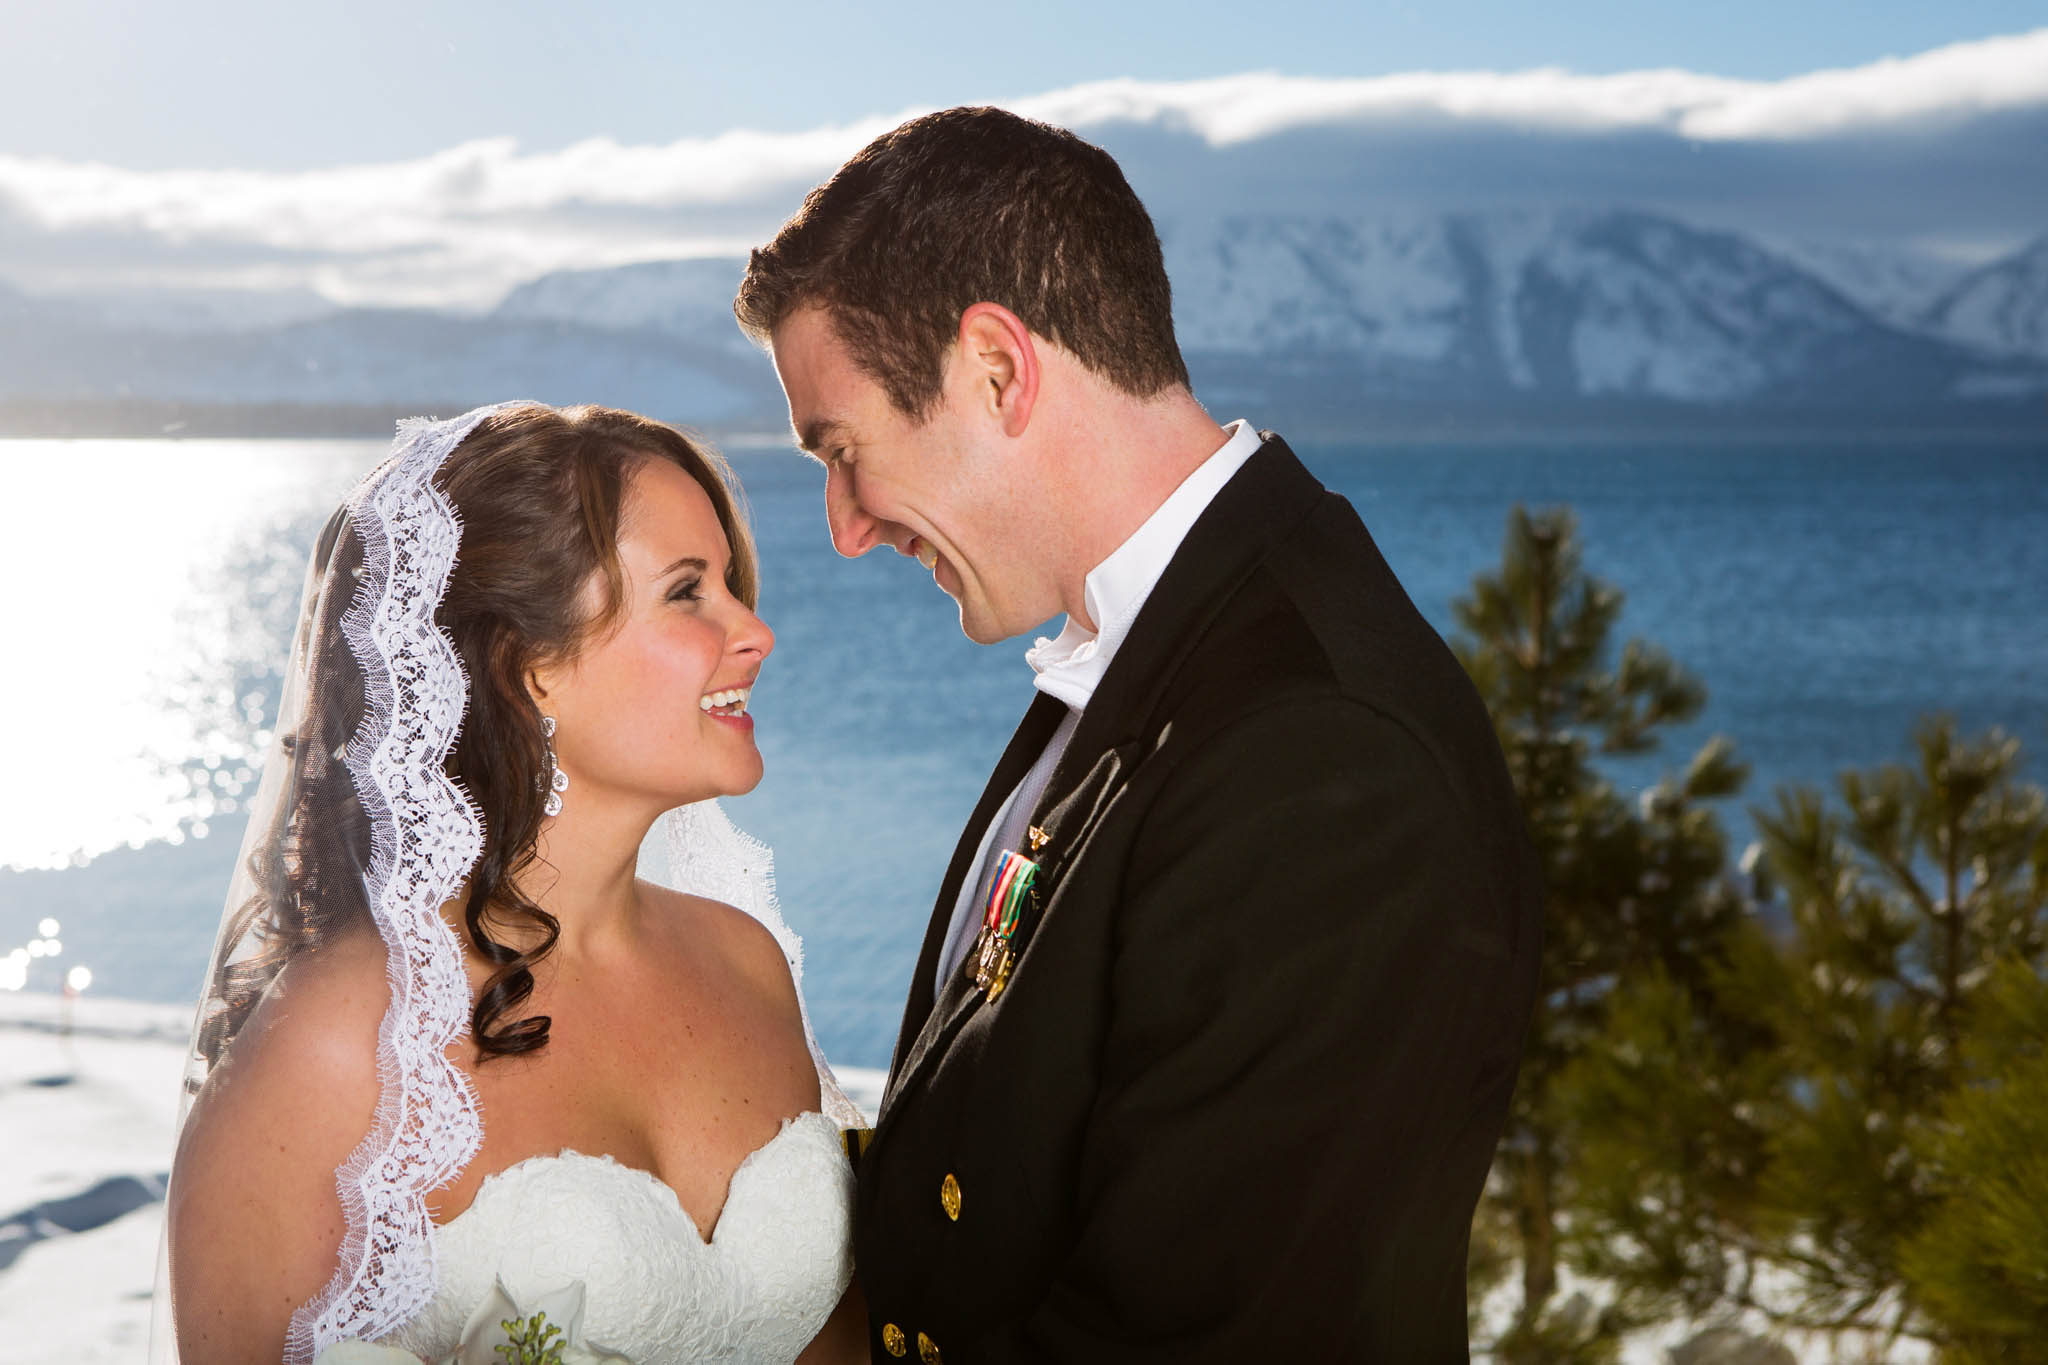 bride and groom close-up, candid, laughing, lake view, snow, uniform